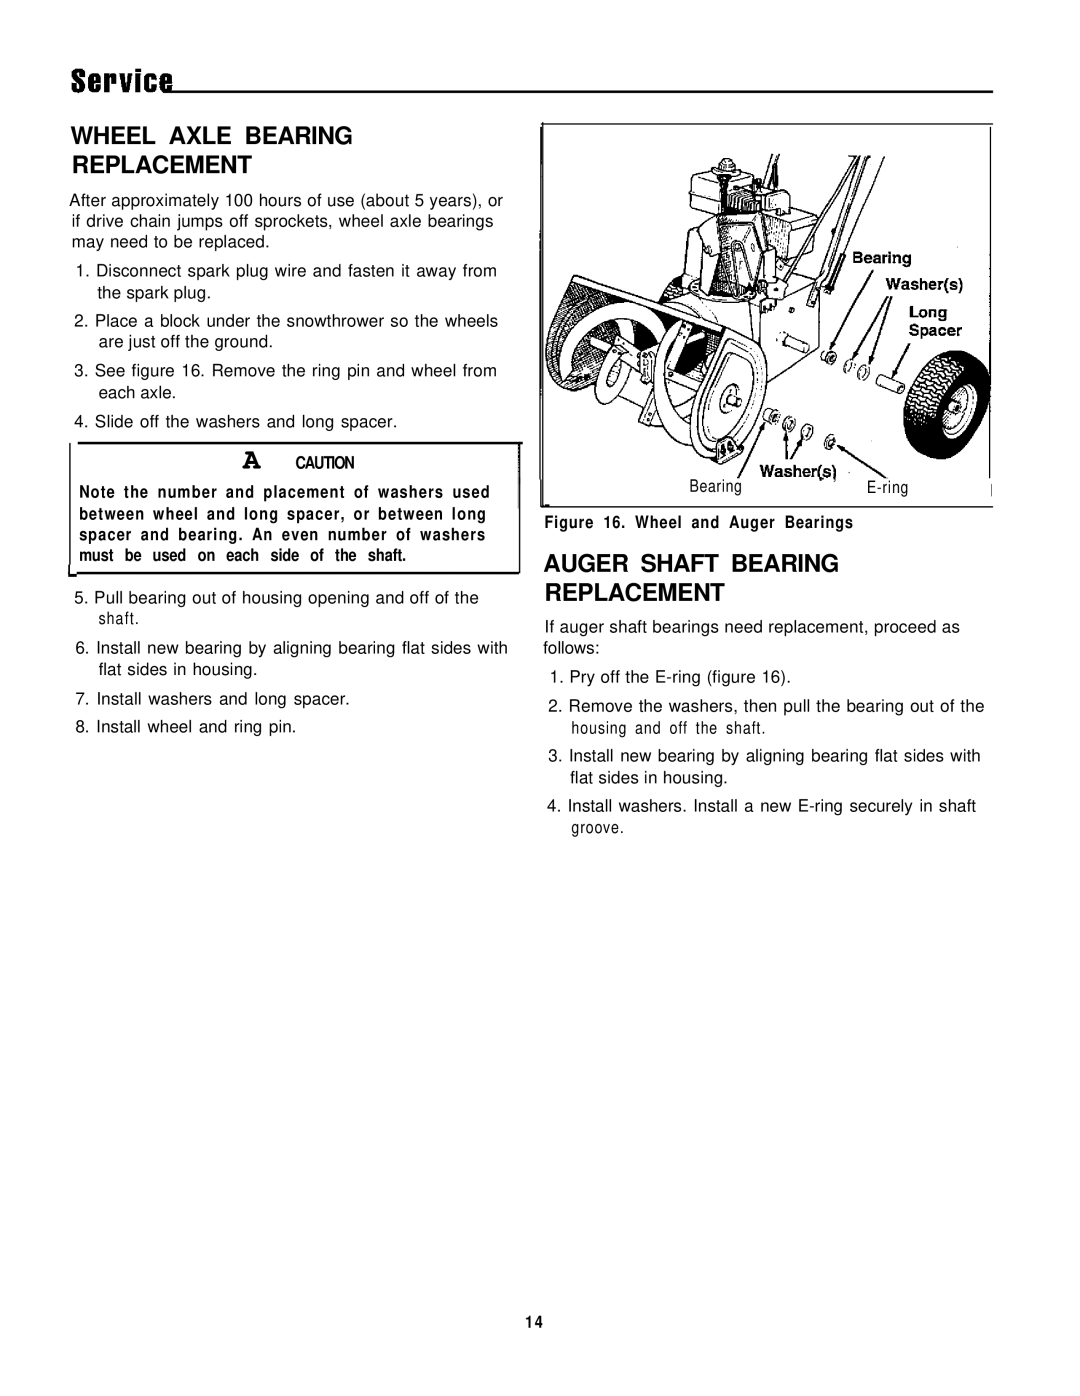 Simplicity 1691414 Wheel Axle Bearing Replacement, Auger Shaft Bearing Replacement, Must be used on each side of the shaft 